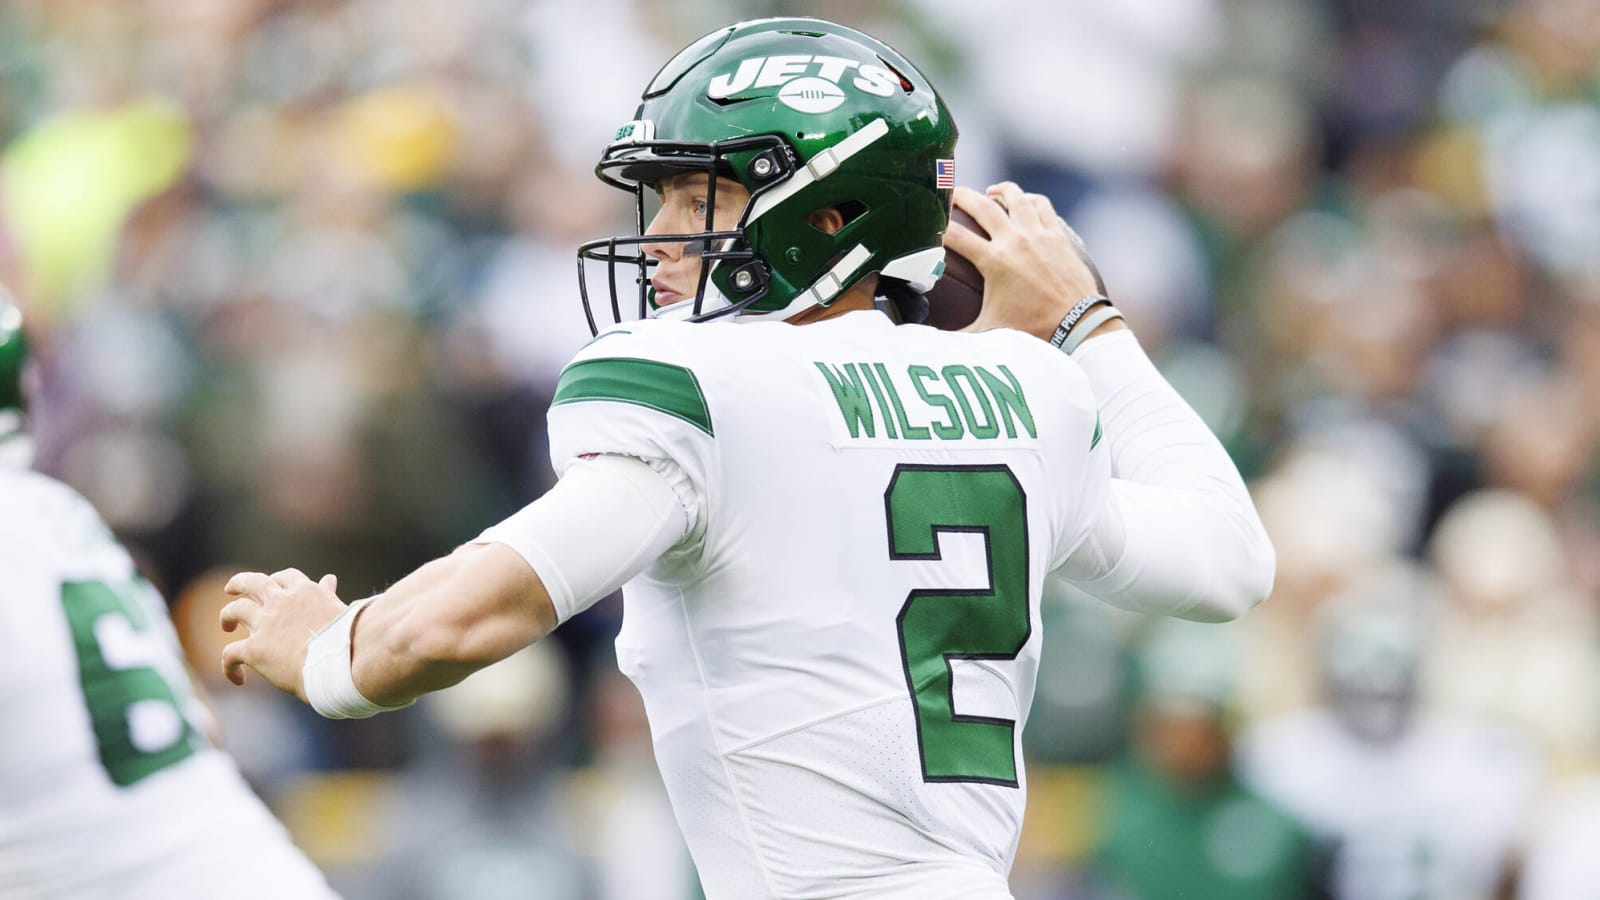 Jets QB Zach Wilson 1 of 2 players with passing, rushing and receiving